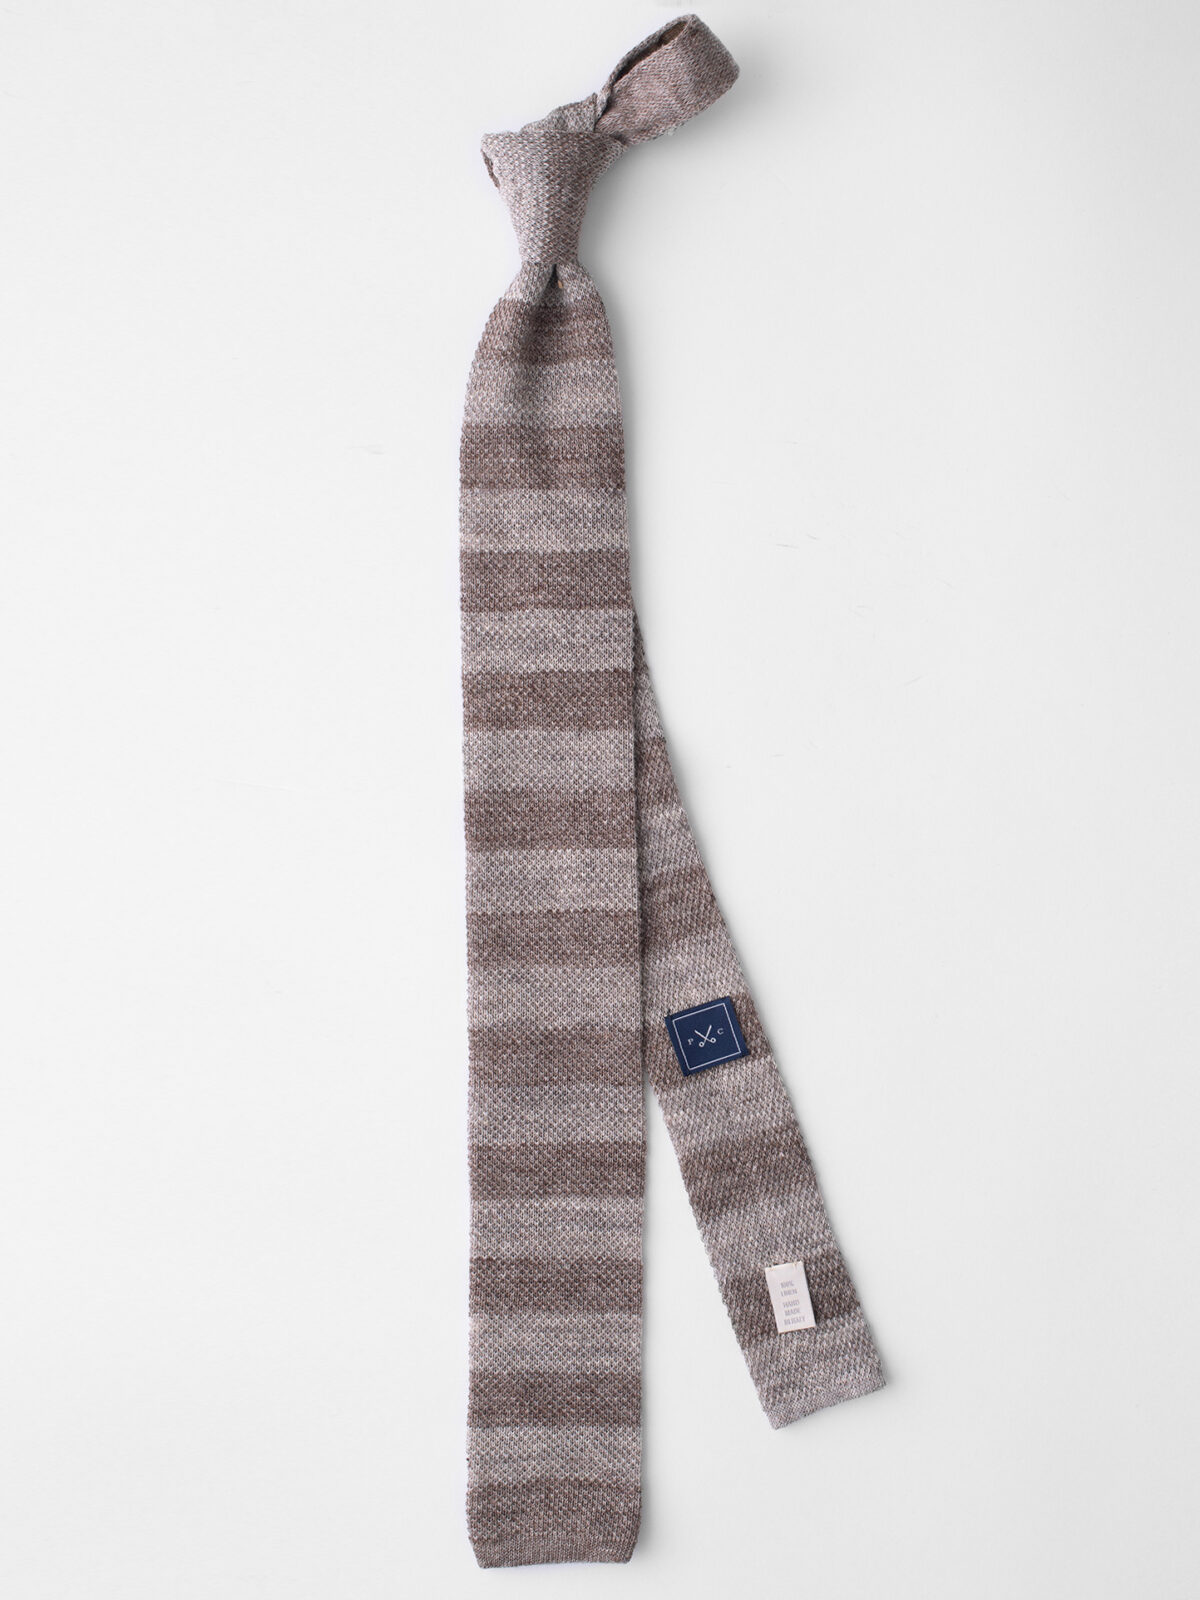 Beige and Brown Striped Linen Knit Tie